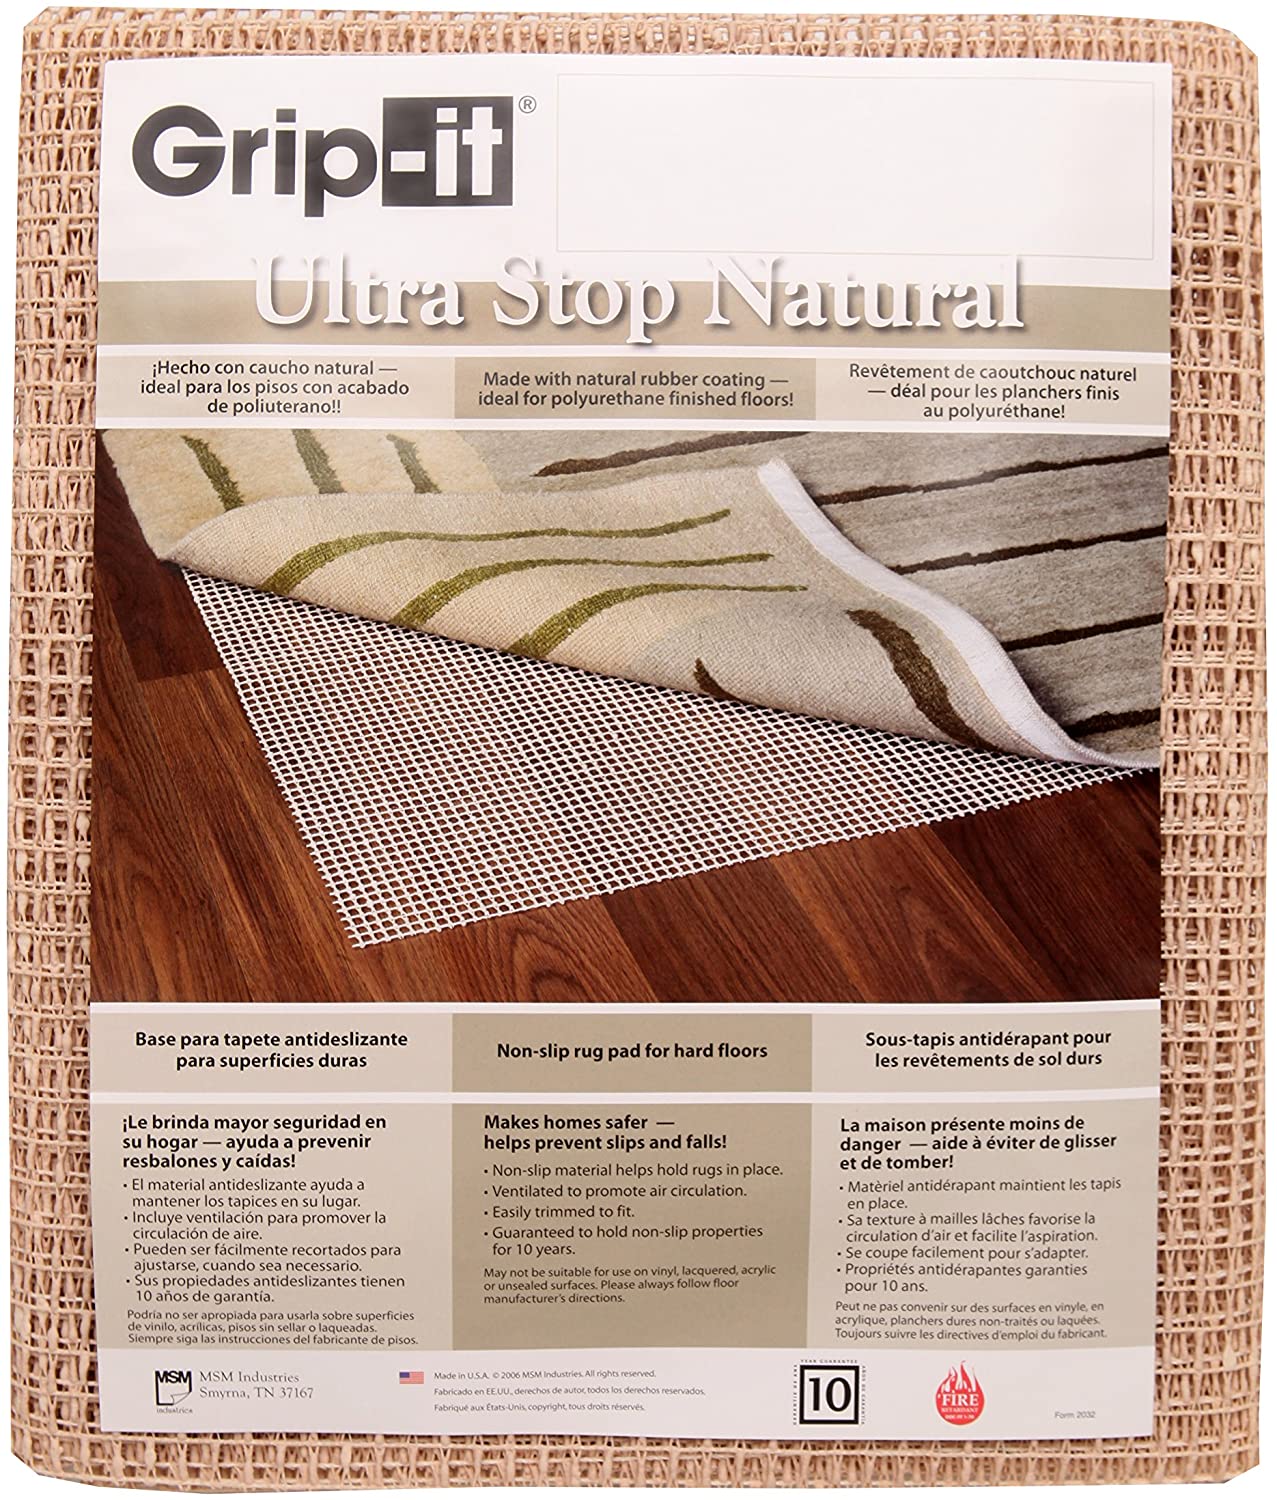 Non Slip Rug Pad Emard, How To Add Non Slip Rug